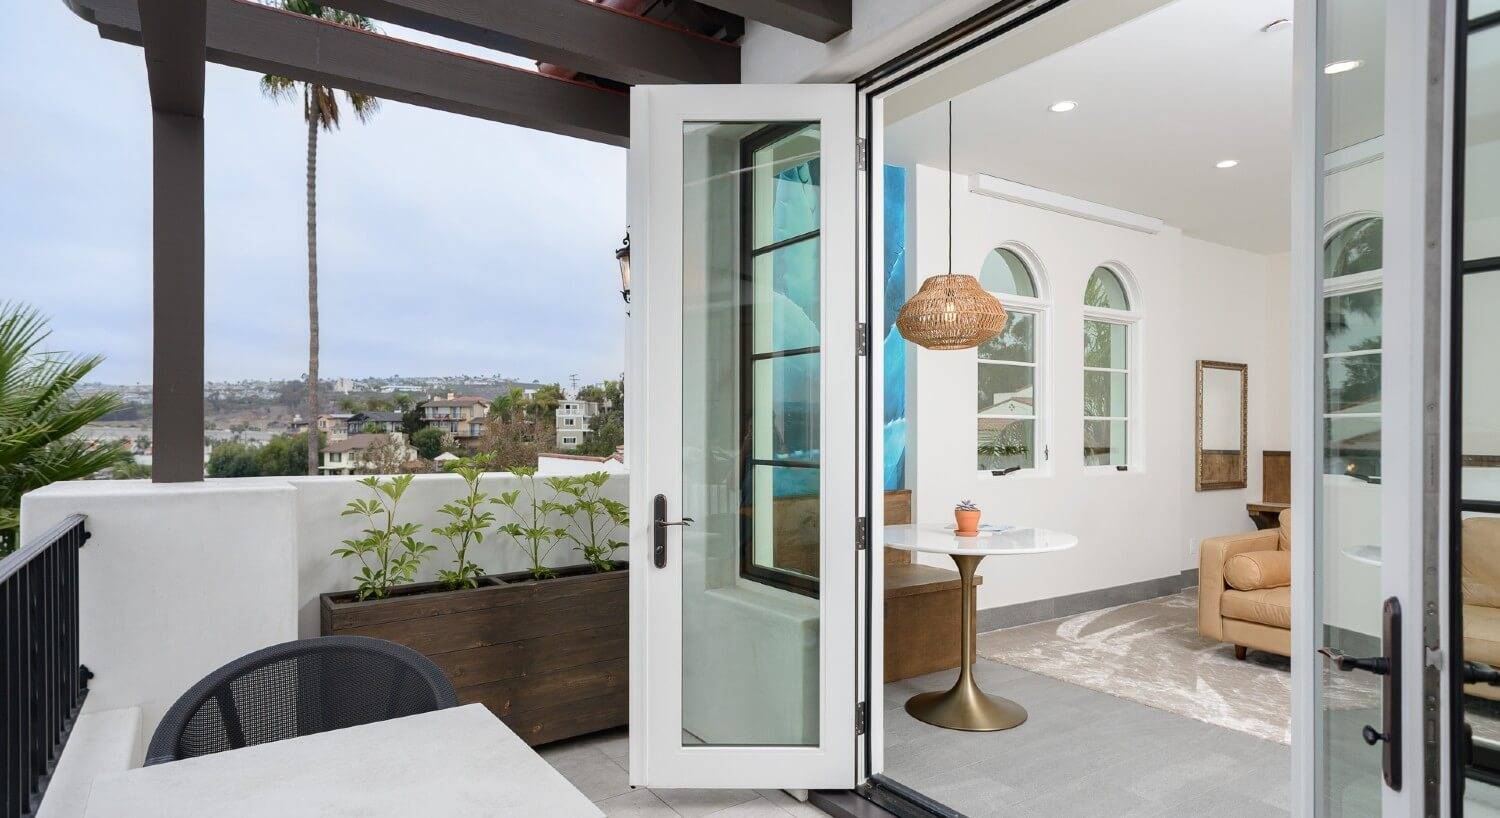 Large French doors open to an outdoor patio overlooking a city and inside of a spacious bedroom